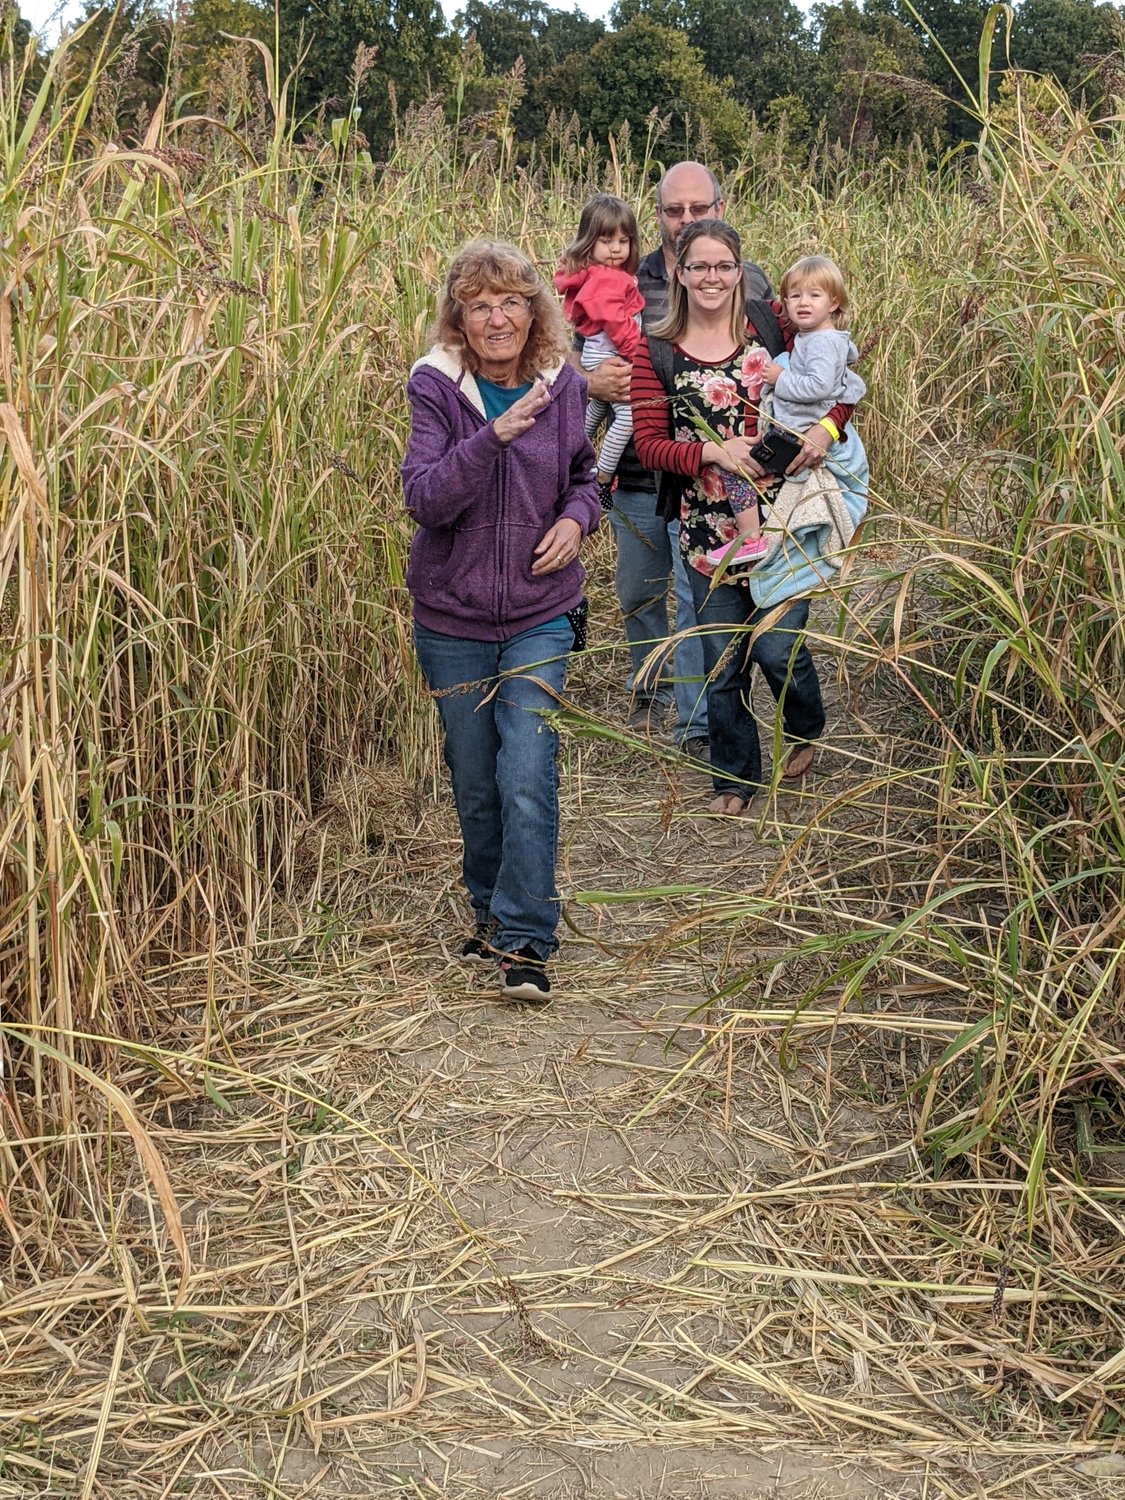 Duane Tillery and the Tait family return from an exciting trip through the corn maze at Fieth Family Farm.